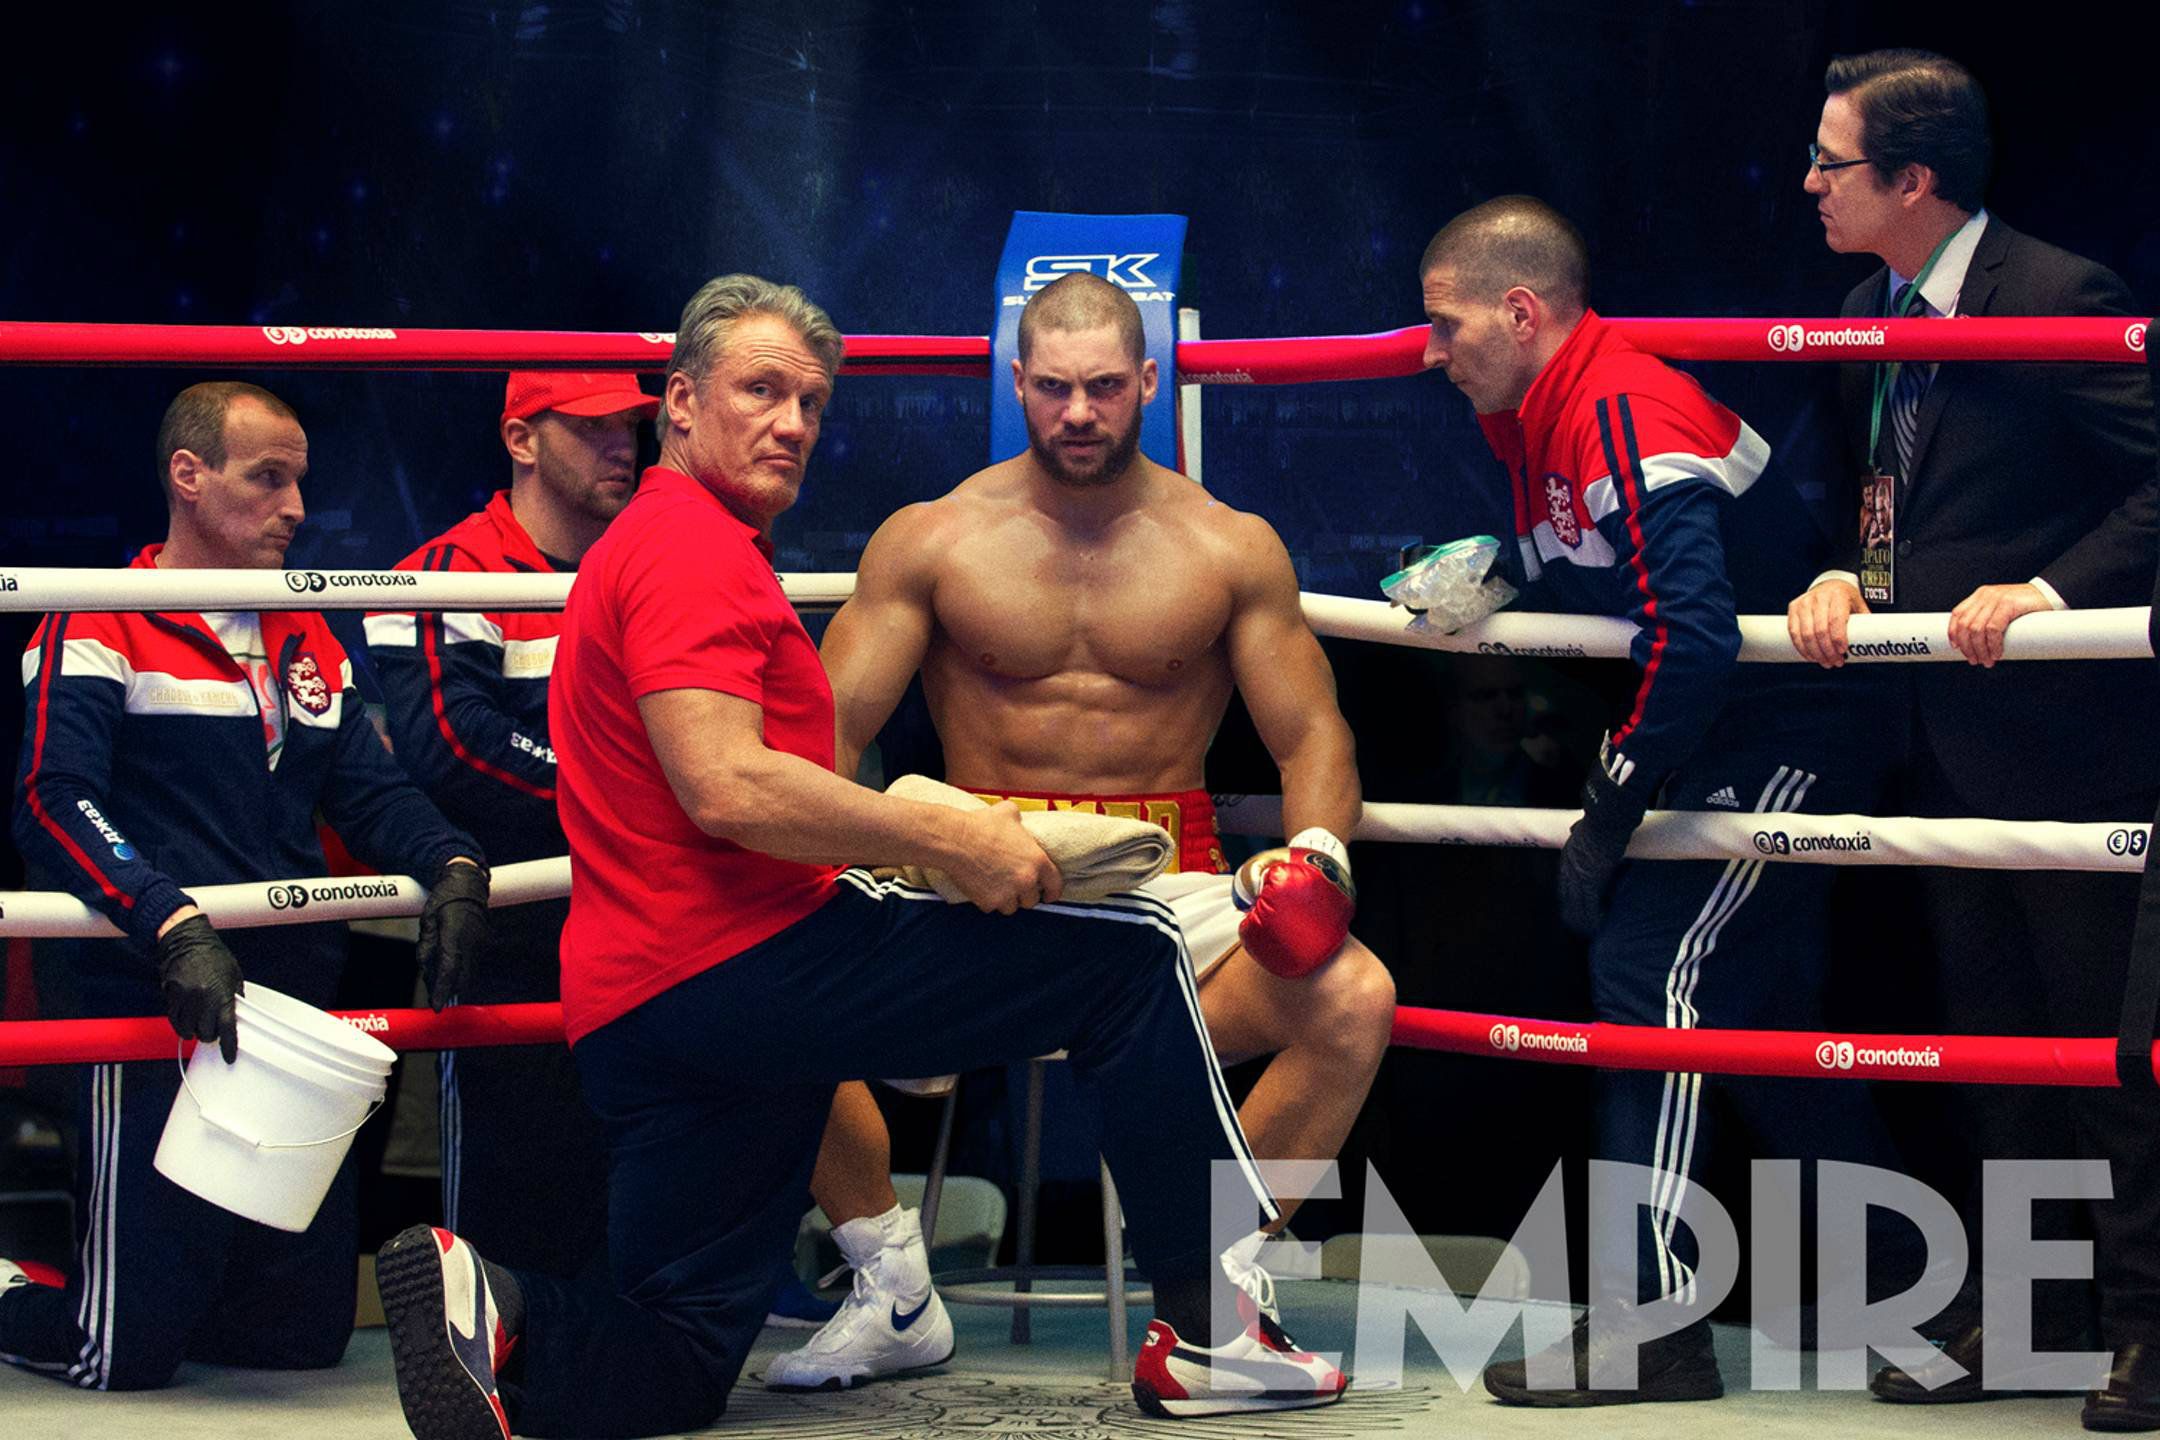 Creed 2: Ivan Drago is ‘Pretty Damaged’, Says Dolph Lundgren